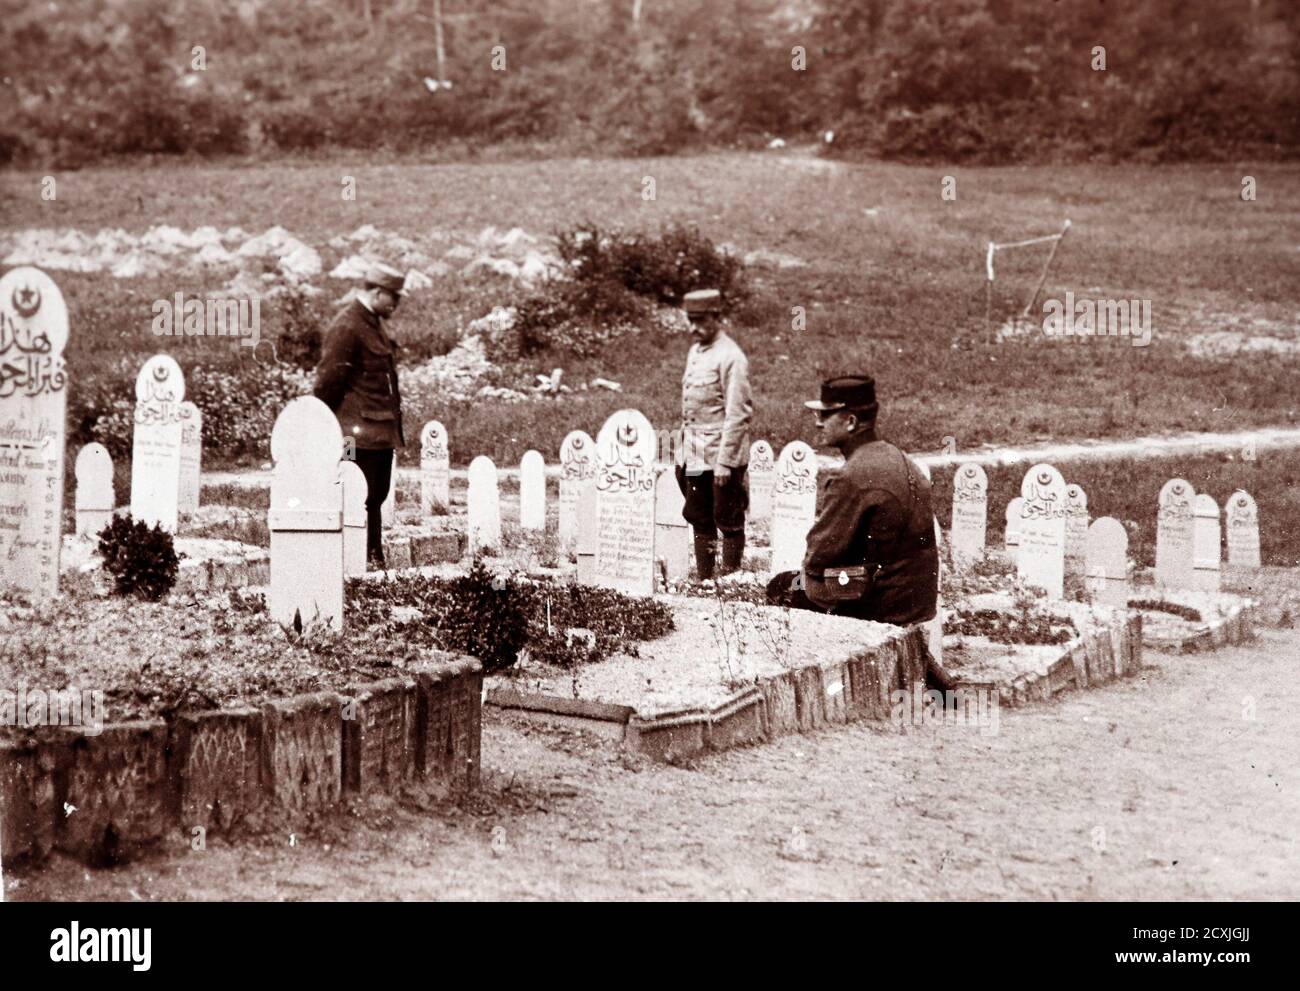 An undated archive picture shows French officers visiting a muslim cemetery  with recent graves of WWI soldiers killed on the front lines, an unknown  location in France. A Viscount in the Armoured